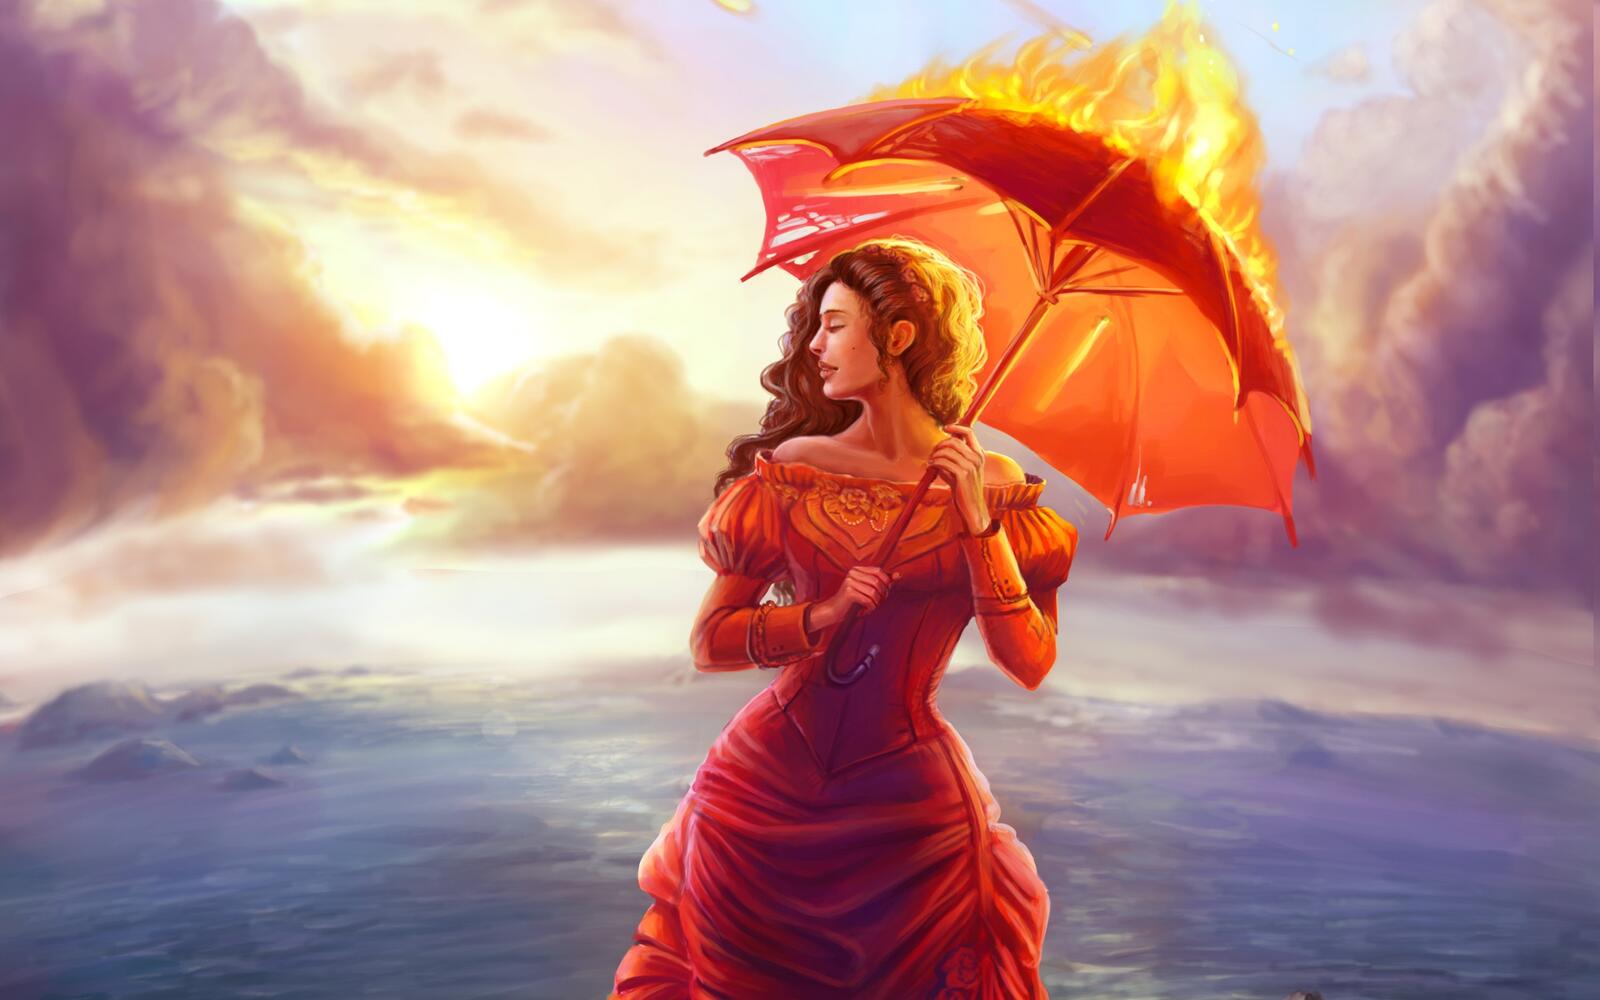 Wallpapers girl with a fire umbrella drawing rendering on the desktop